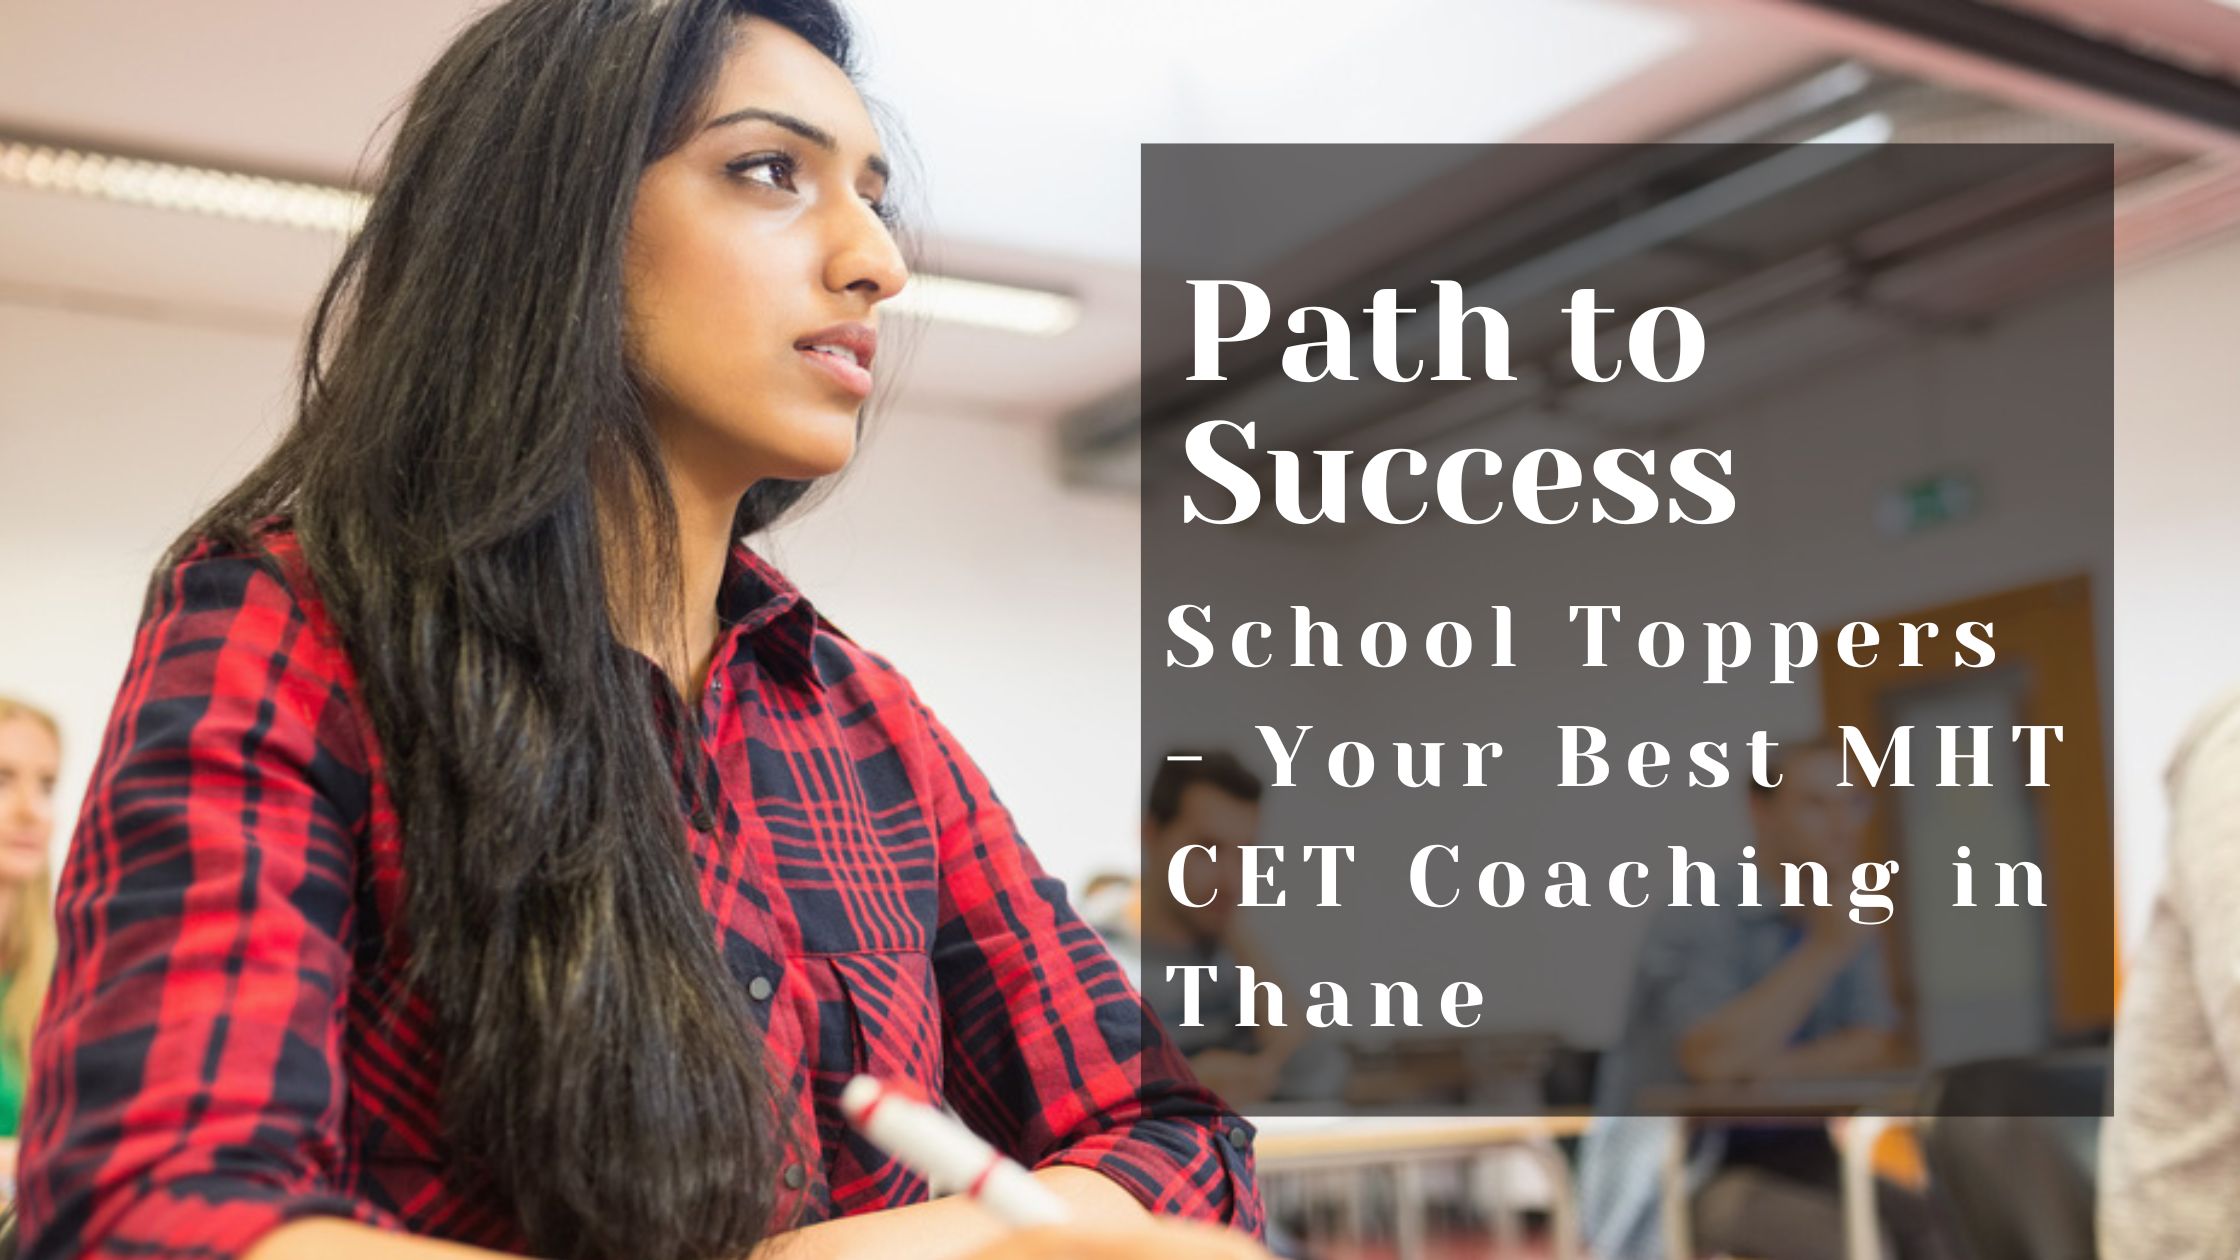 Path to Success School Toppers - Your Best MHT CET Coaching in Thane